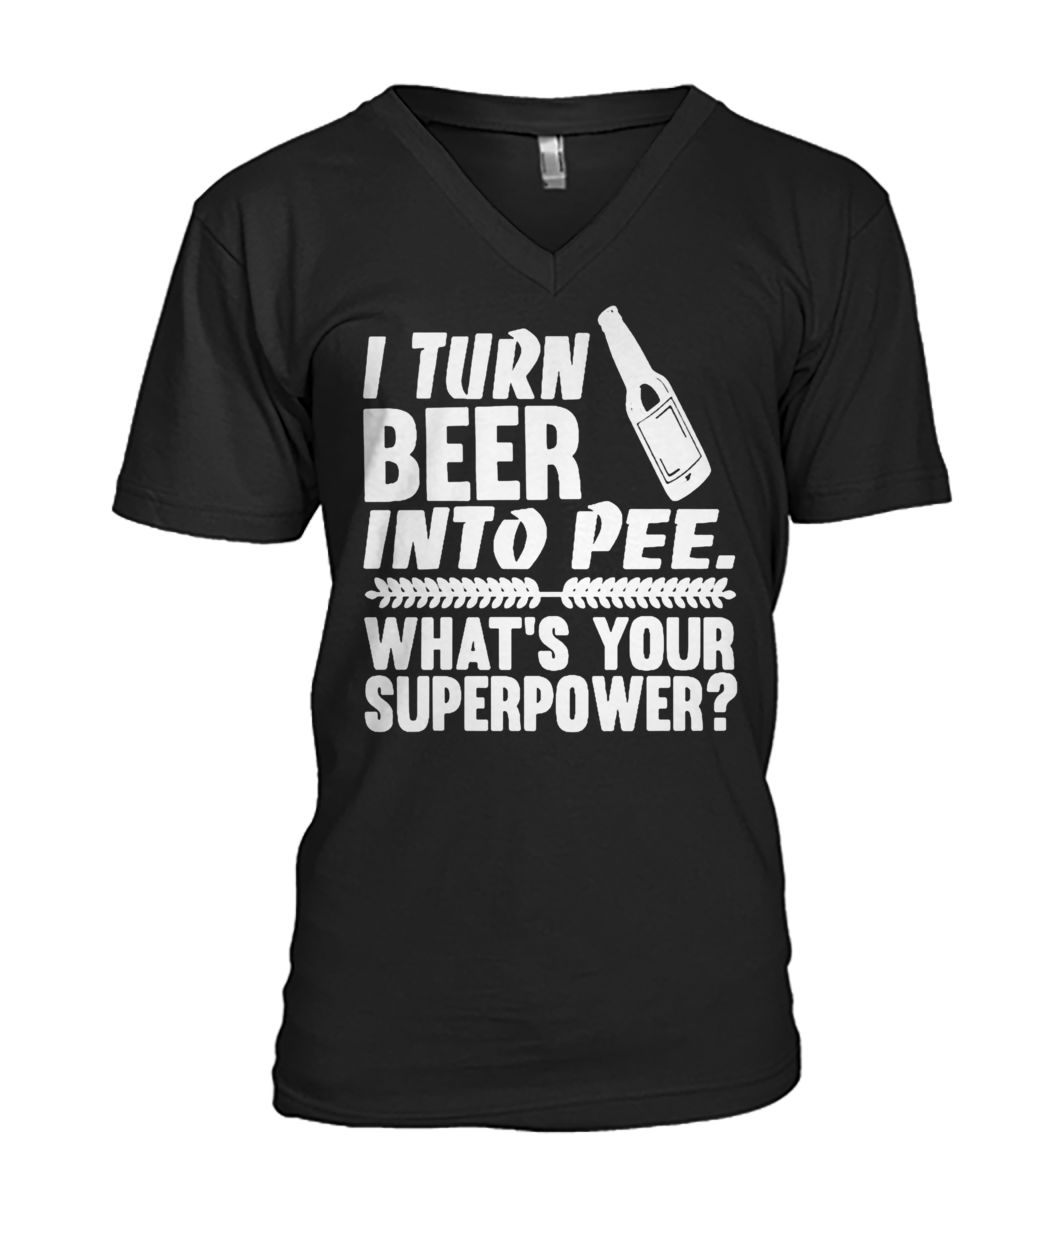 I turn beer into pee what's your supperpower mens v-neck